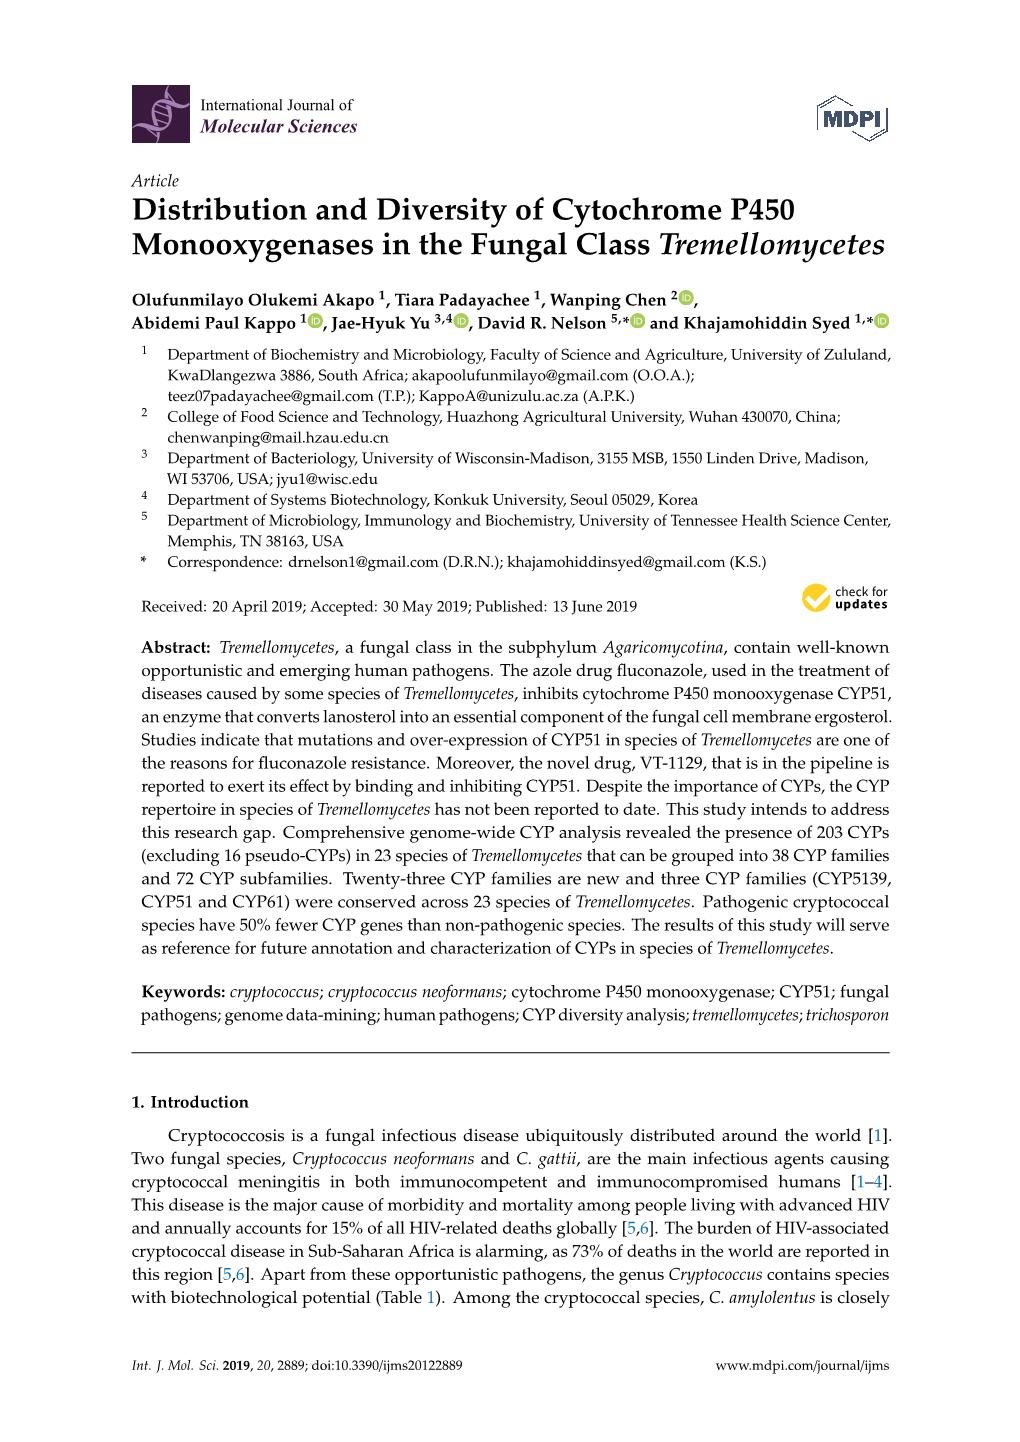 Distribution and Diversity of Cytochrome P450 Monooxygenases in the Fungal Class Tremellomycetes